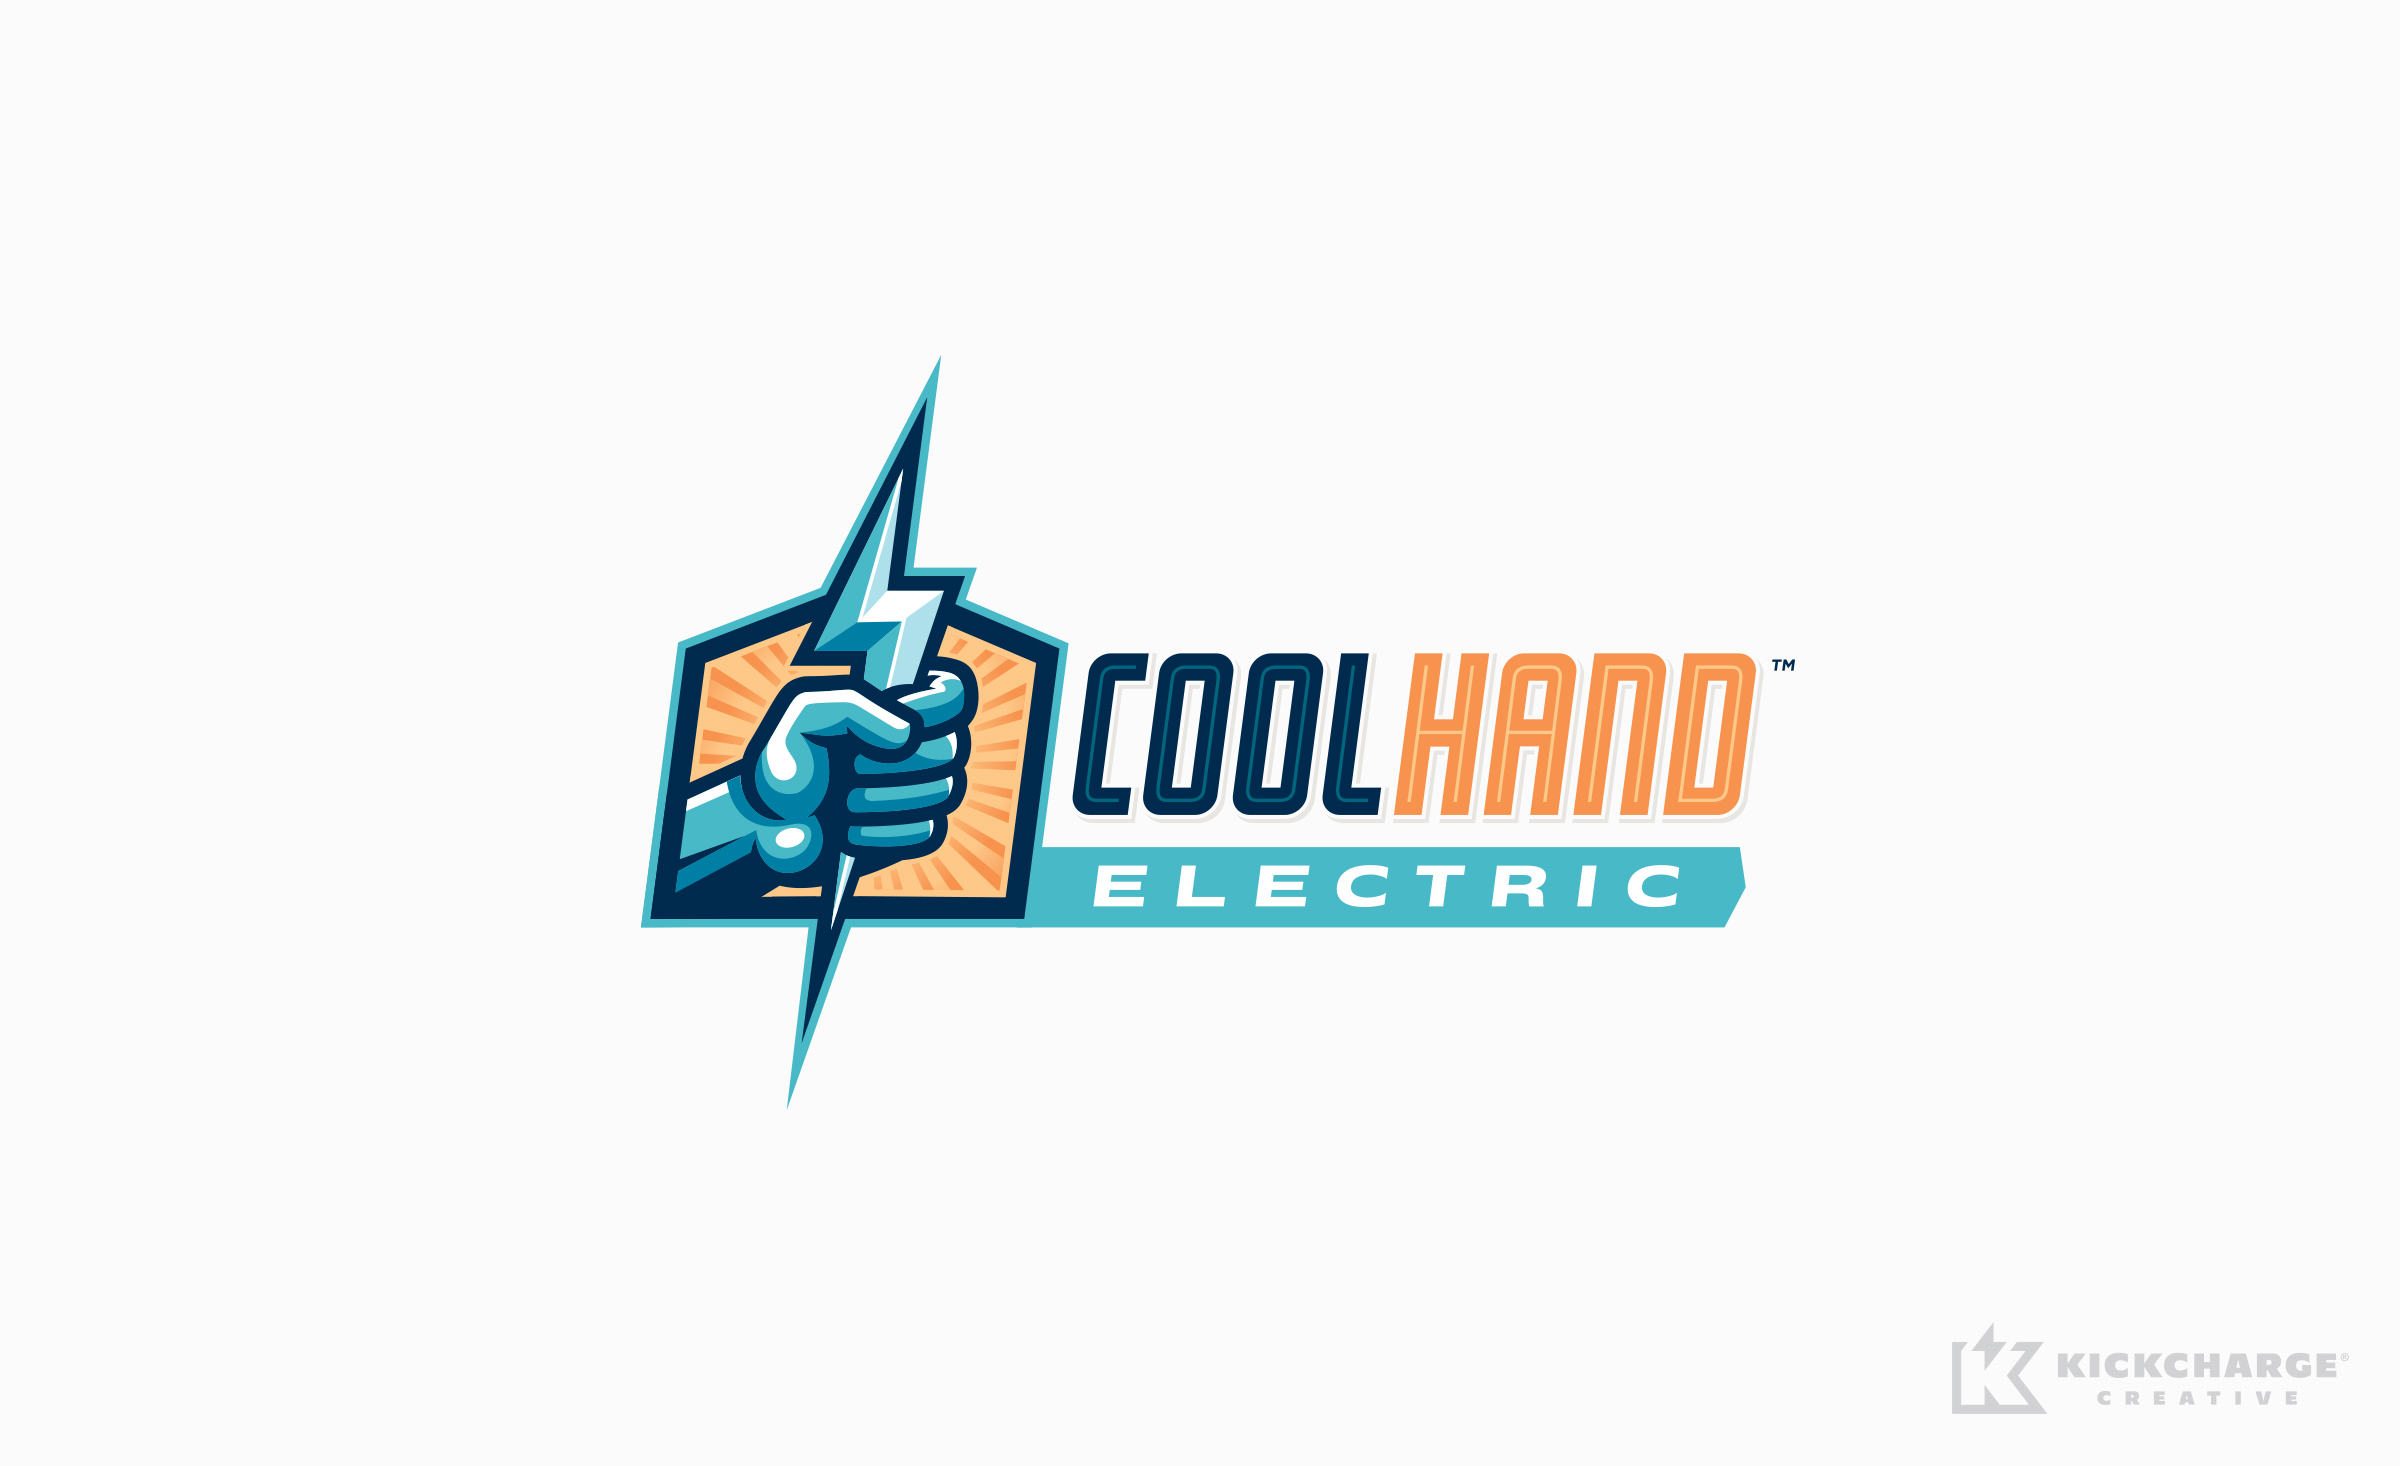 Logo design for Cool Hand Electric.